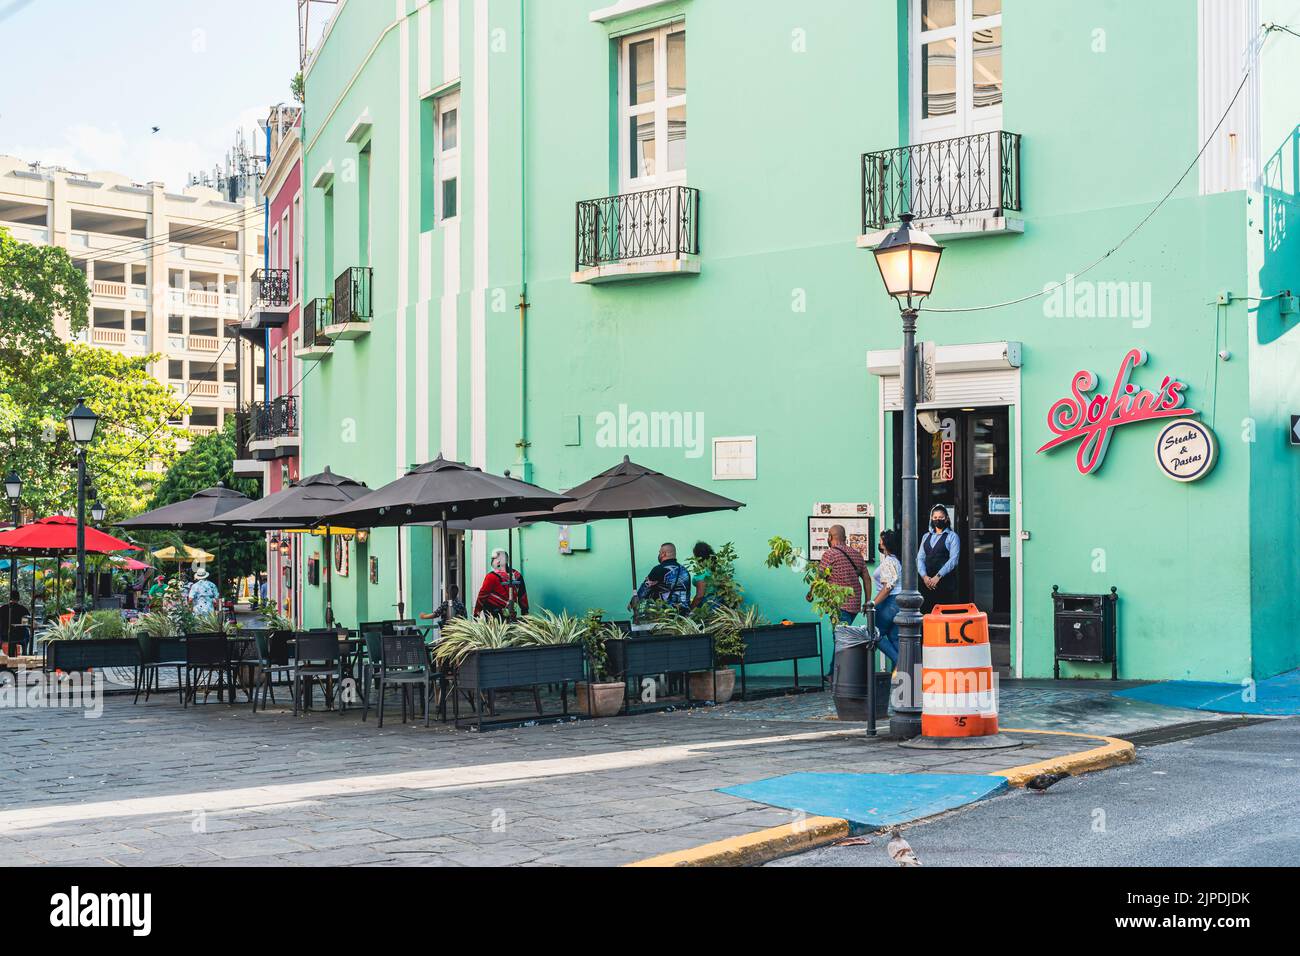 Old San Juan, Puerto Rico - August 25, 2021: Green Colored Restaurant Located in Old San Juan Puerto Rico. Stock Photo